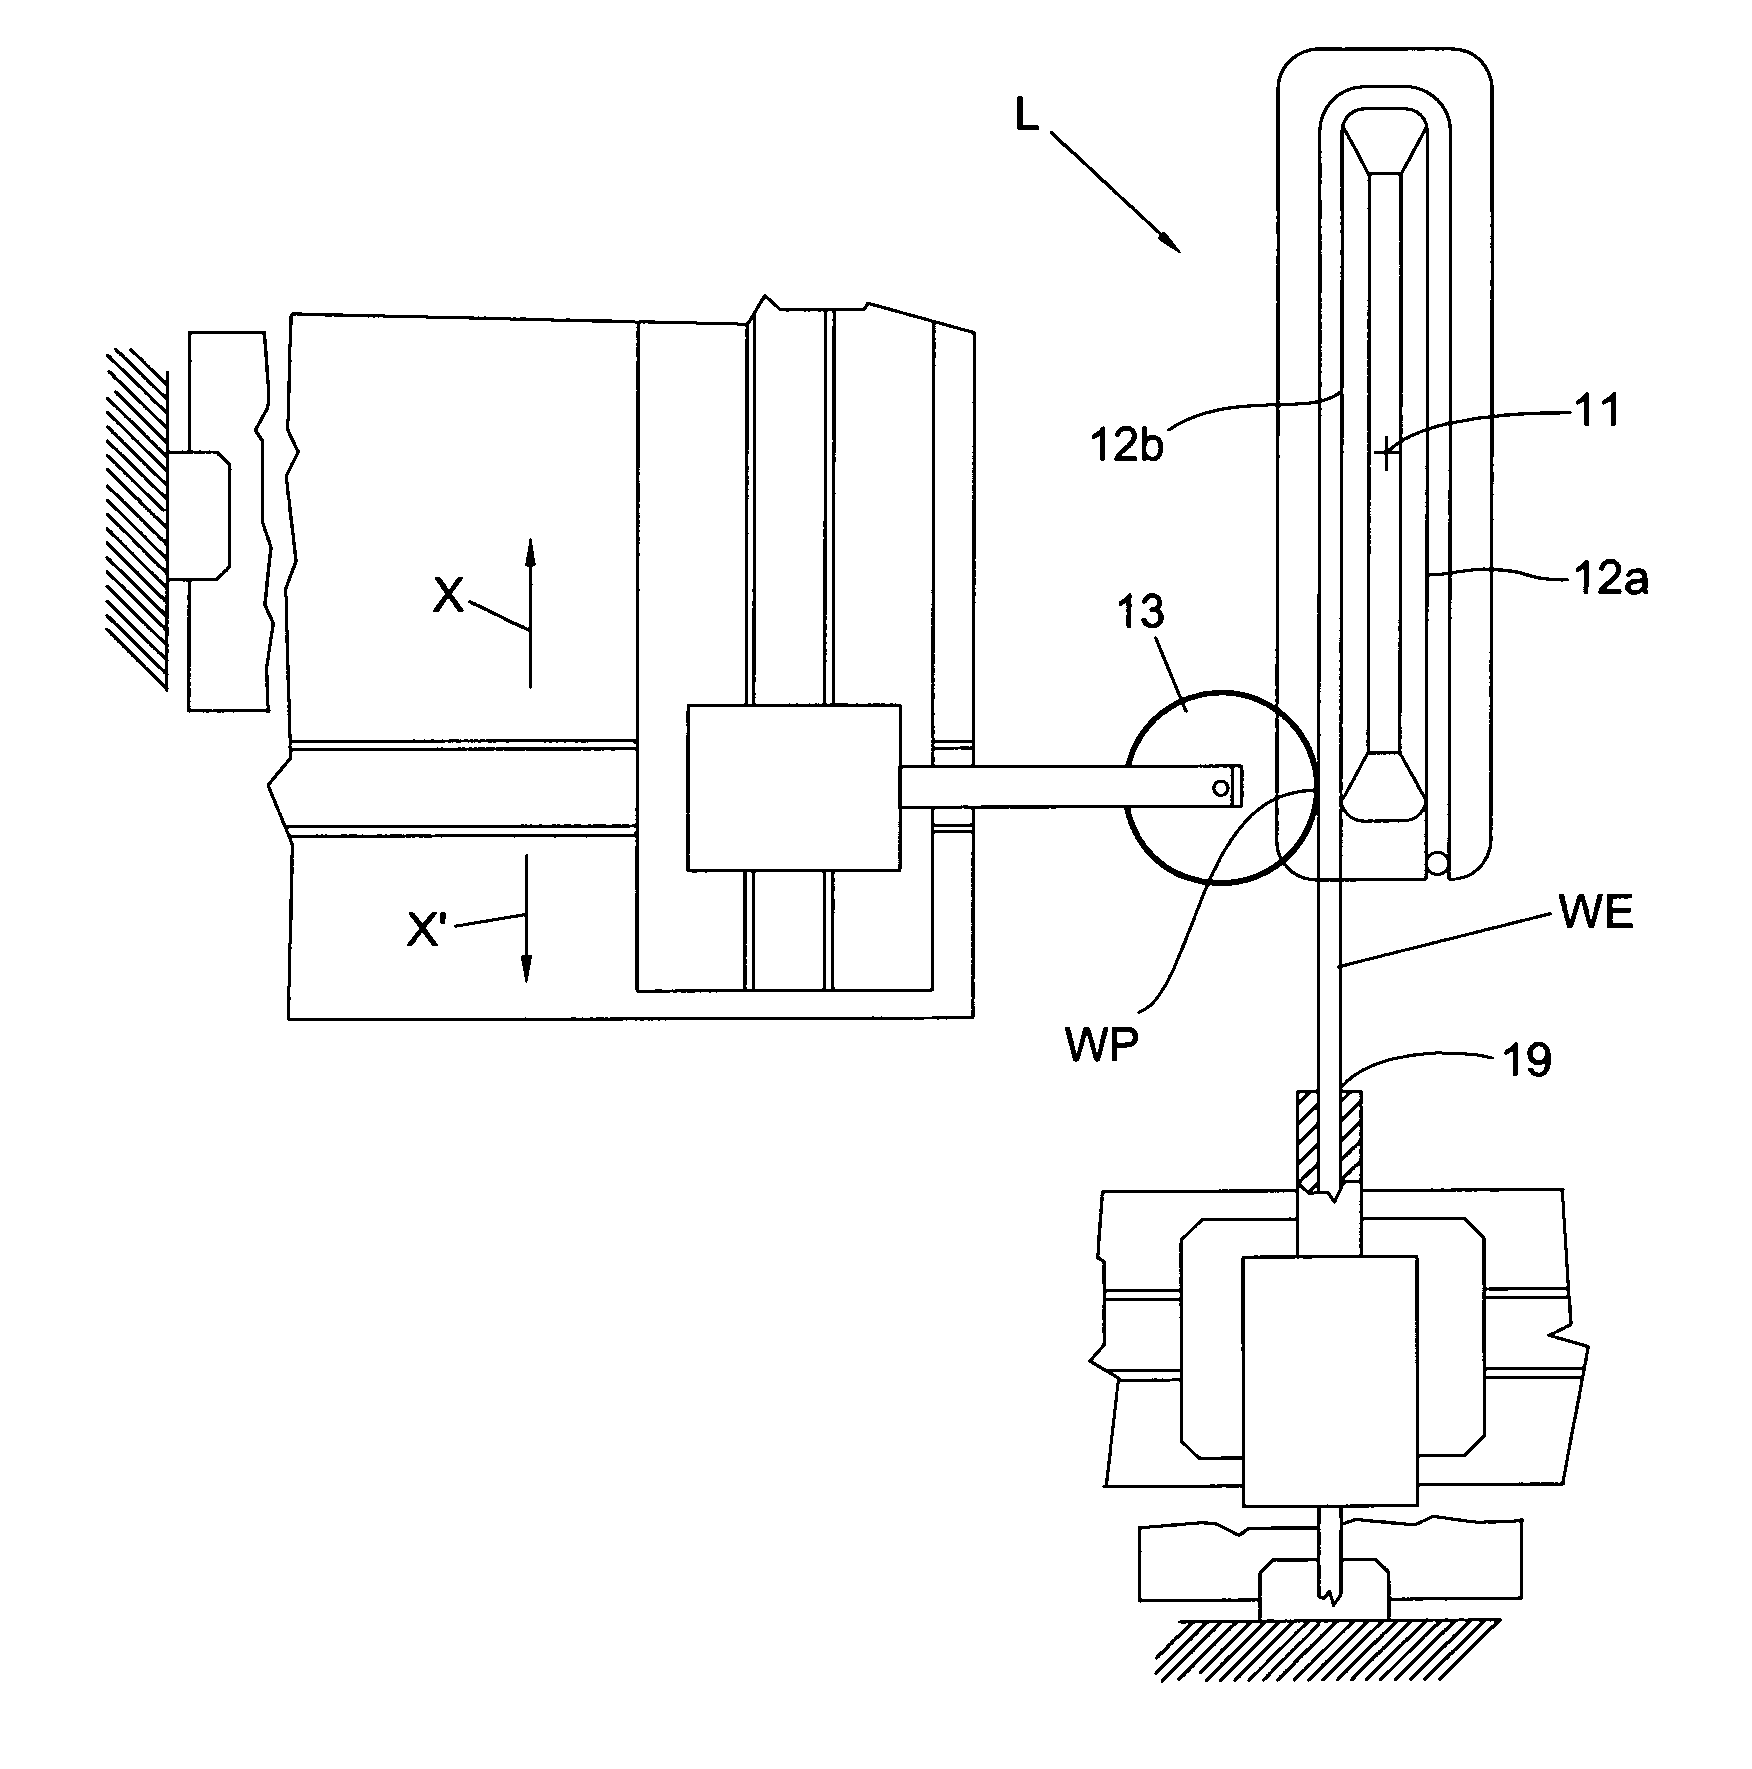 Apparatus and methods for winding supports for coils and single poles of cores of dynamo electric machines